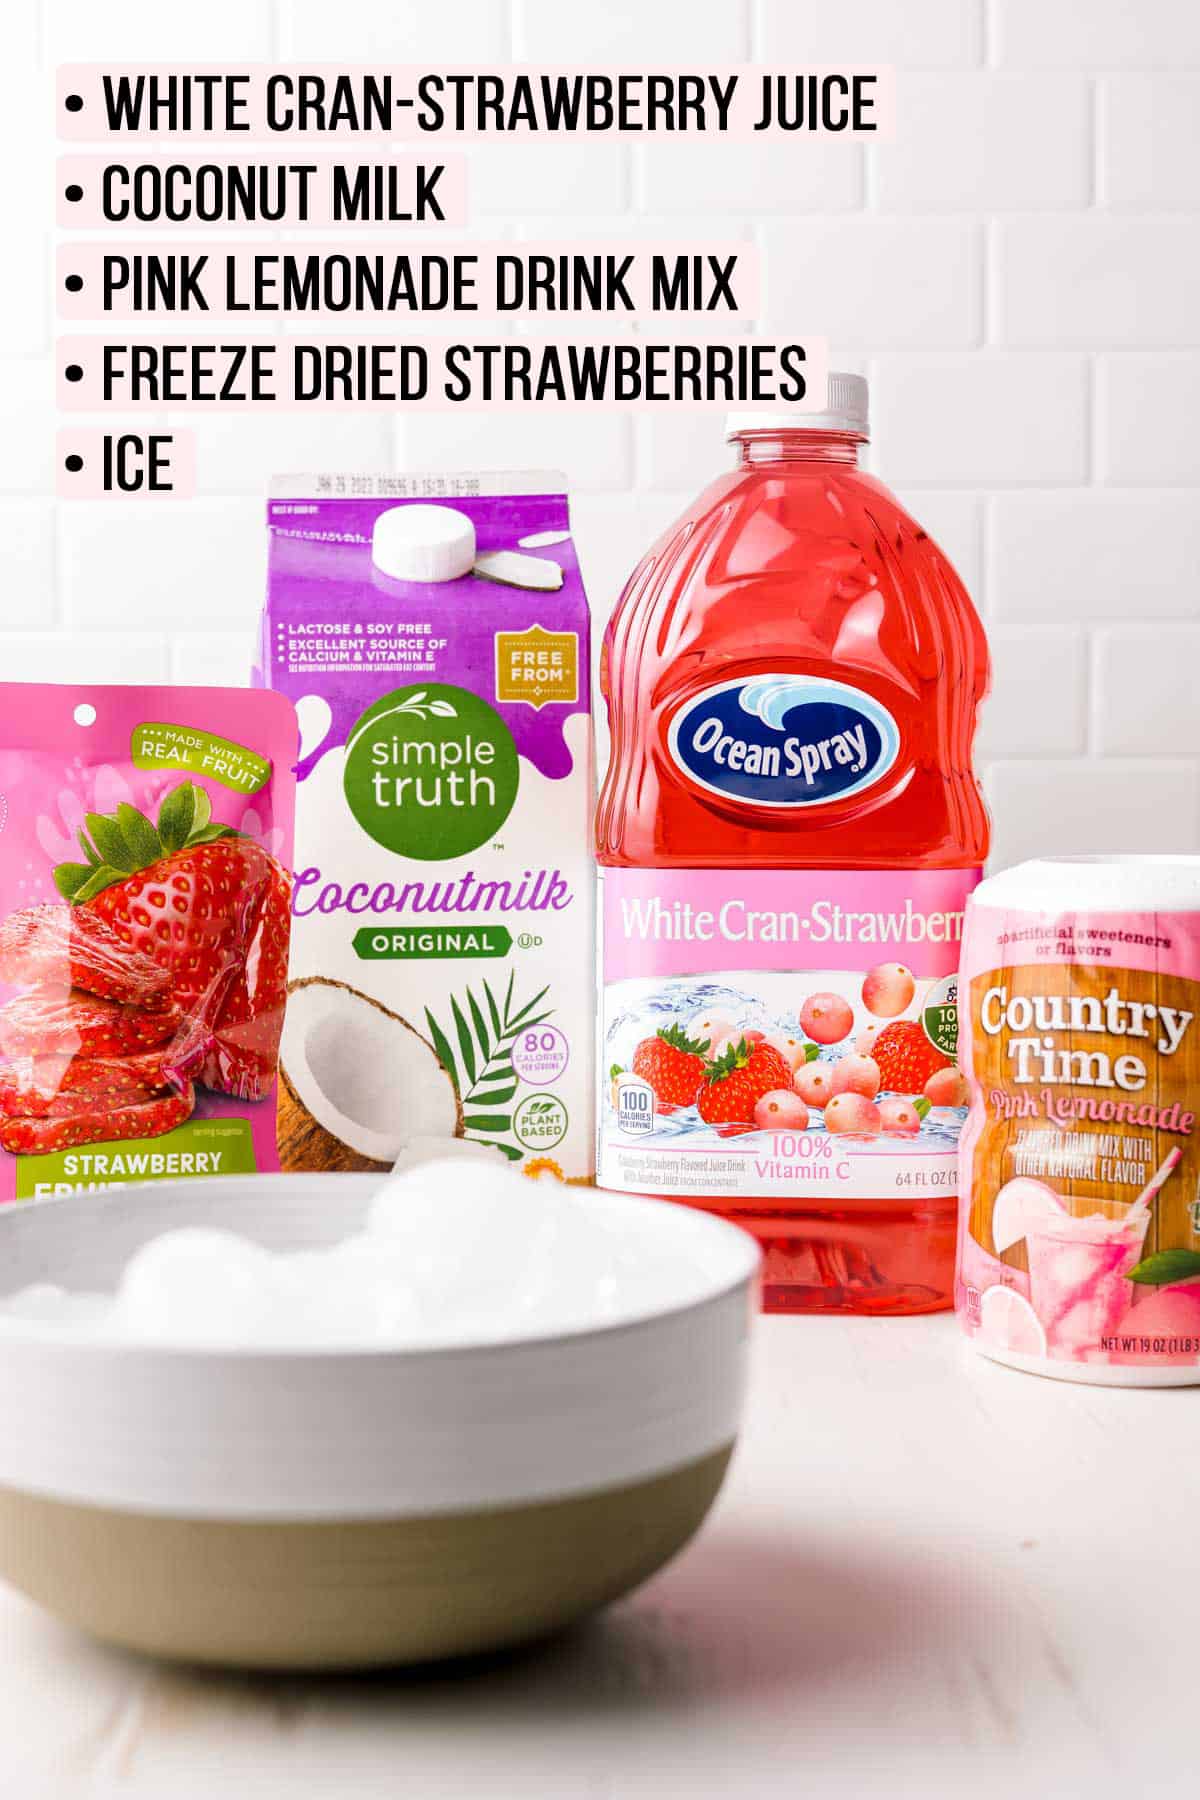 A bottle of ocean spray white-cran-strawberry juice, next to a carton of coconut milk, a package of freeze dried strawberries, country time lemonade mix, and a bowl of ice.